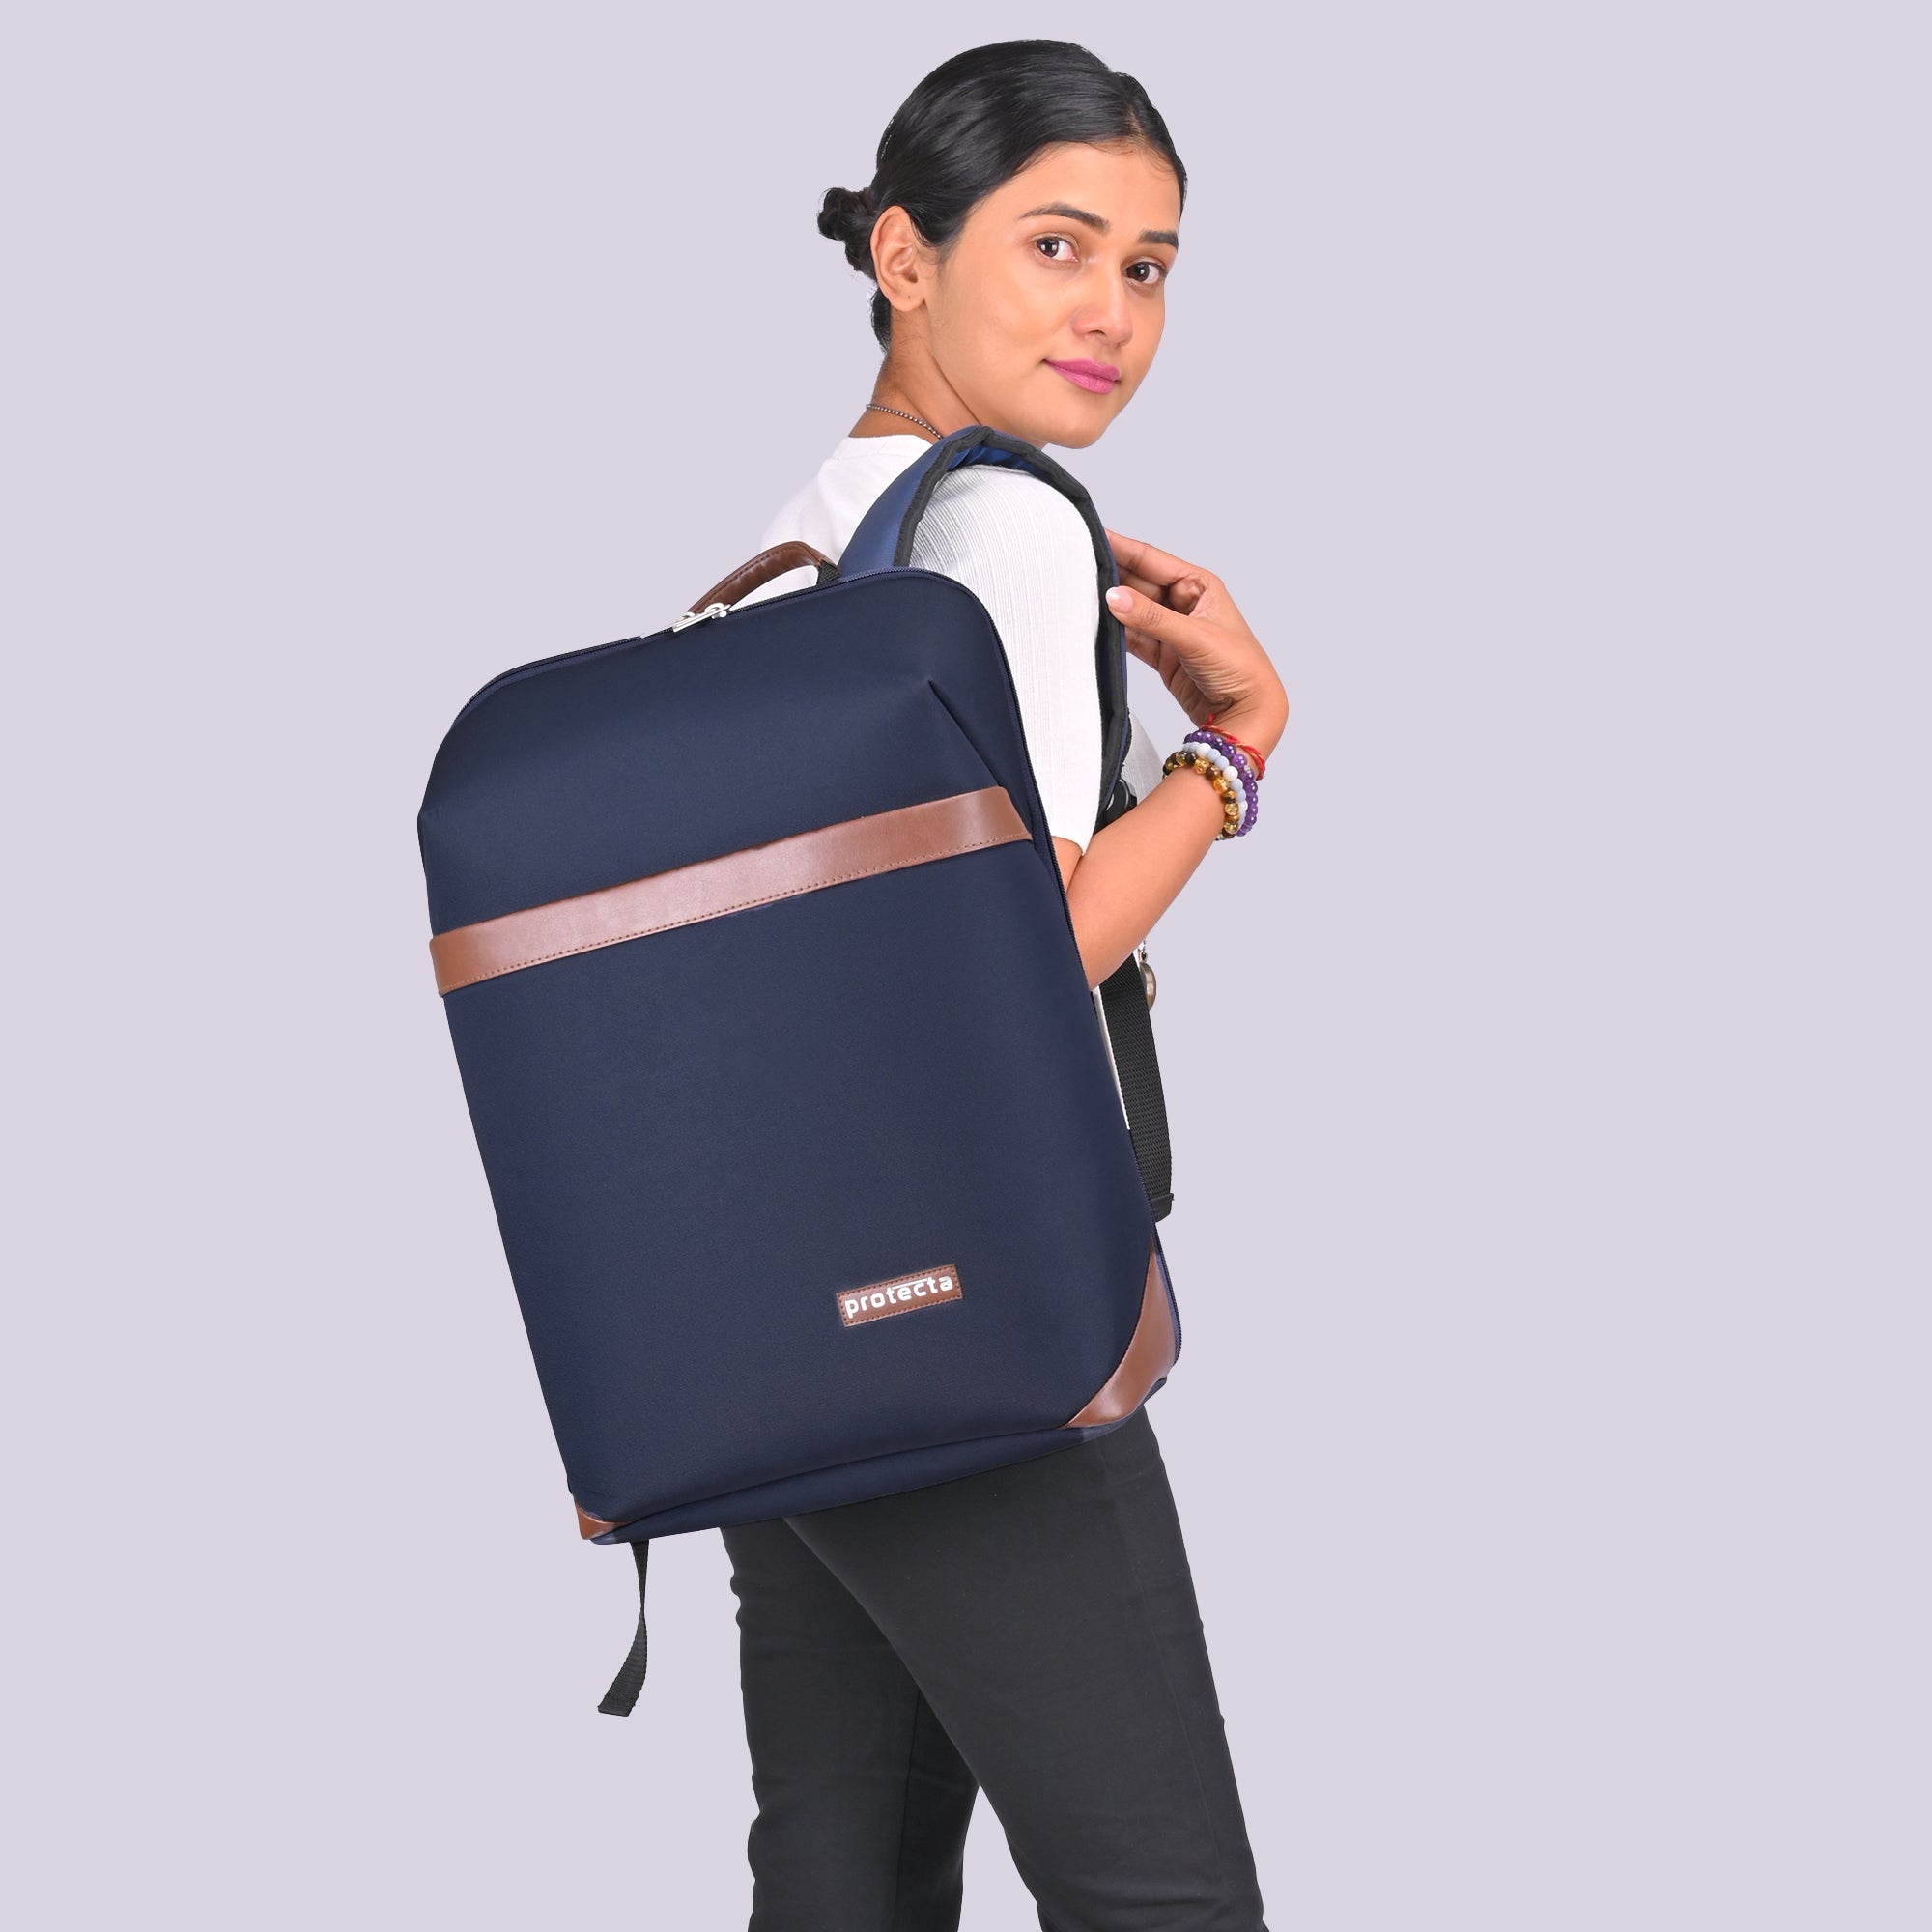 Blue | Protecta Early Lead Anti-Theft Office Laptop Backpack - 6